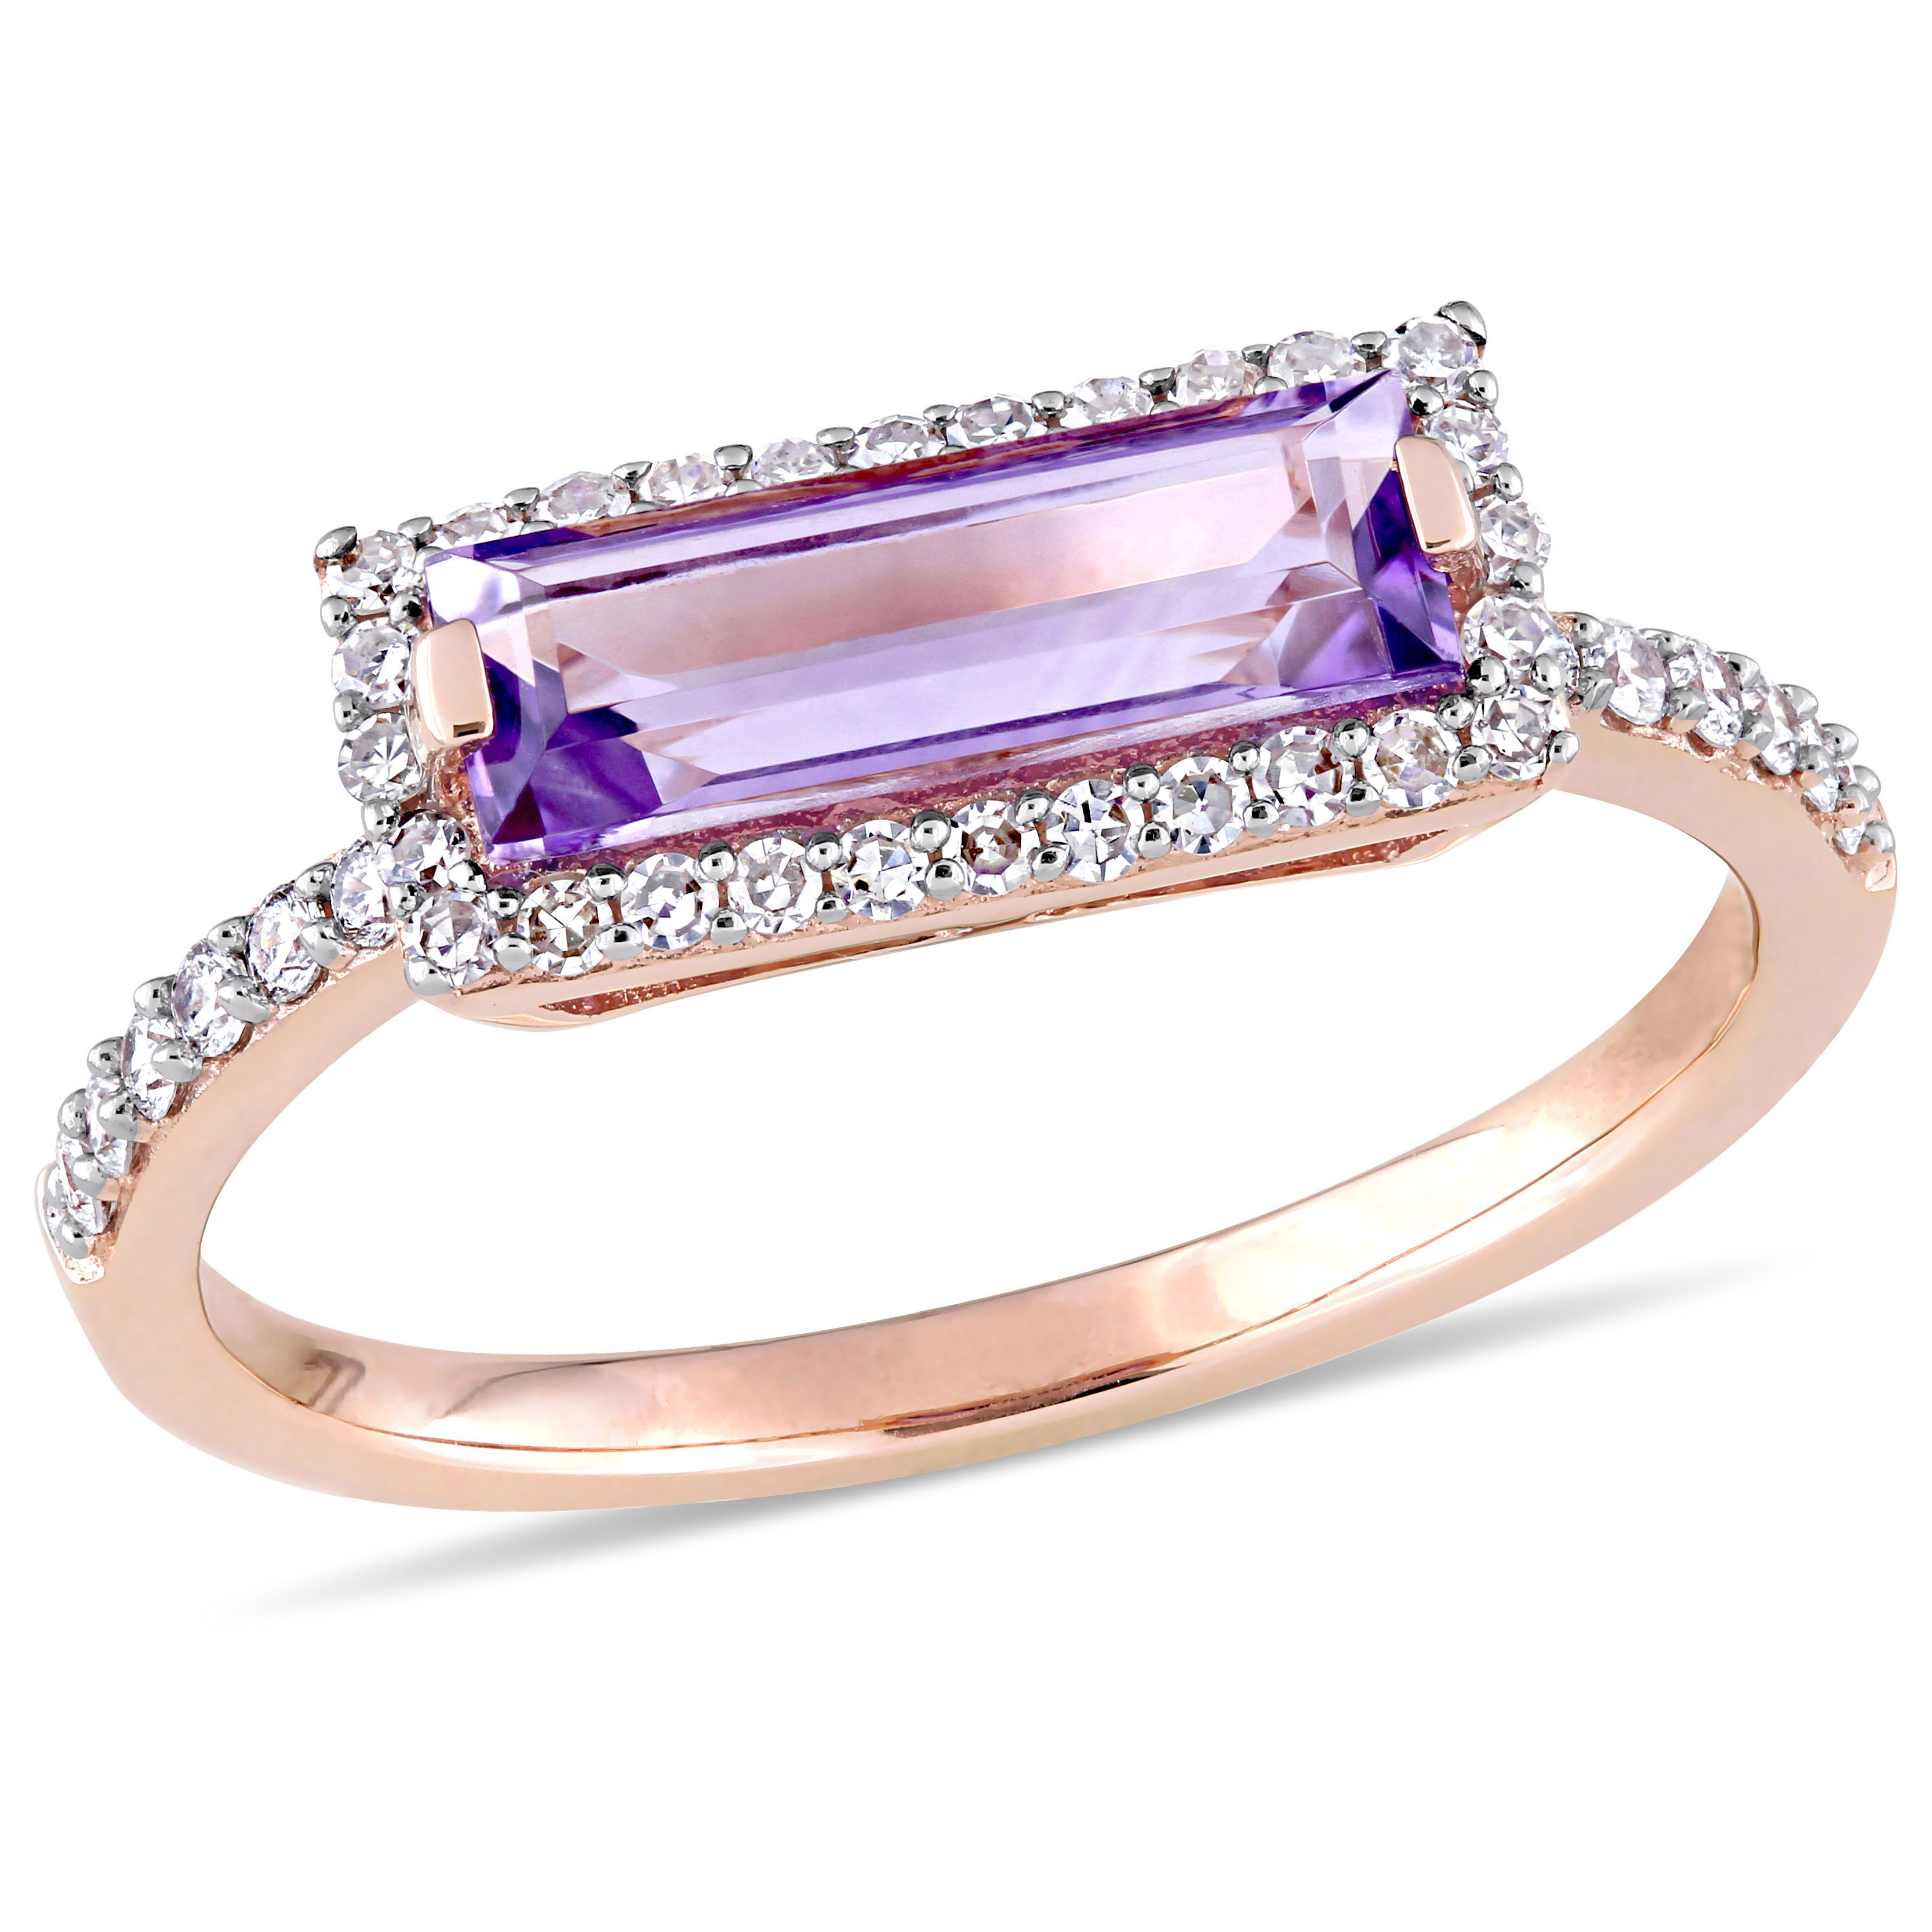 Baguette Cut Amethyst and 1/4 CT TW Diamond Halo Ring in 14k Rose Gold